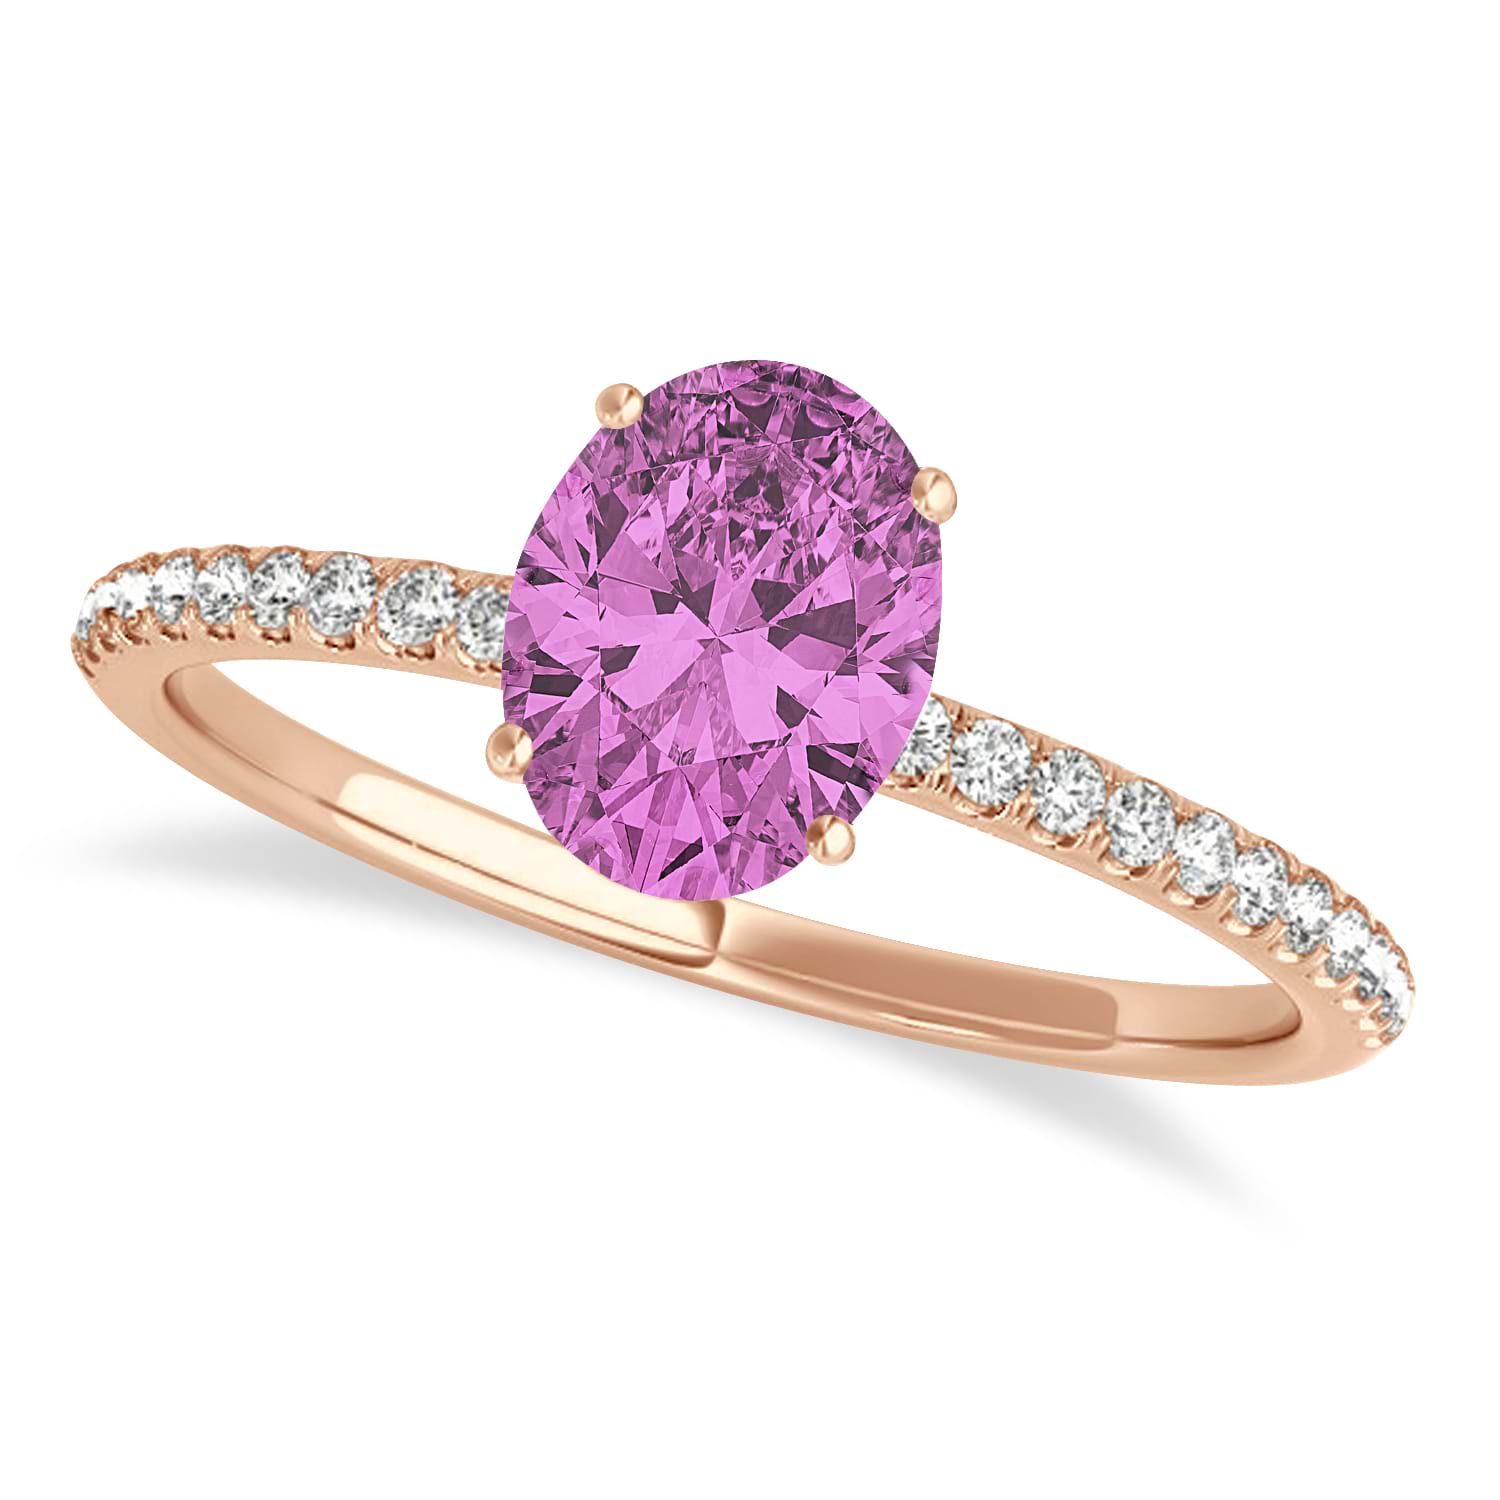 Pink Sapphire & Diamond Accented Oval Shape Engagement Ring 14k Rose Gold (2.00ct)